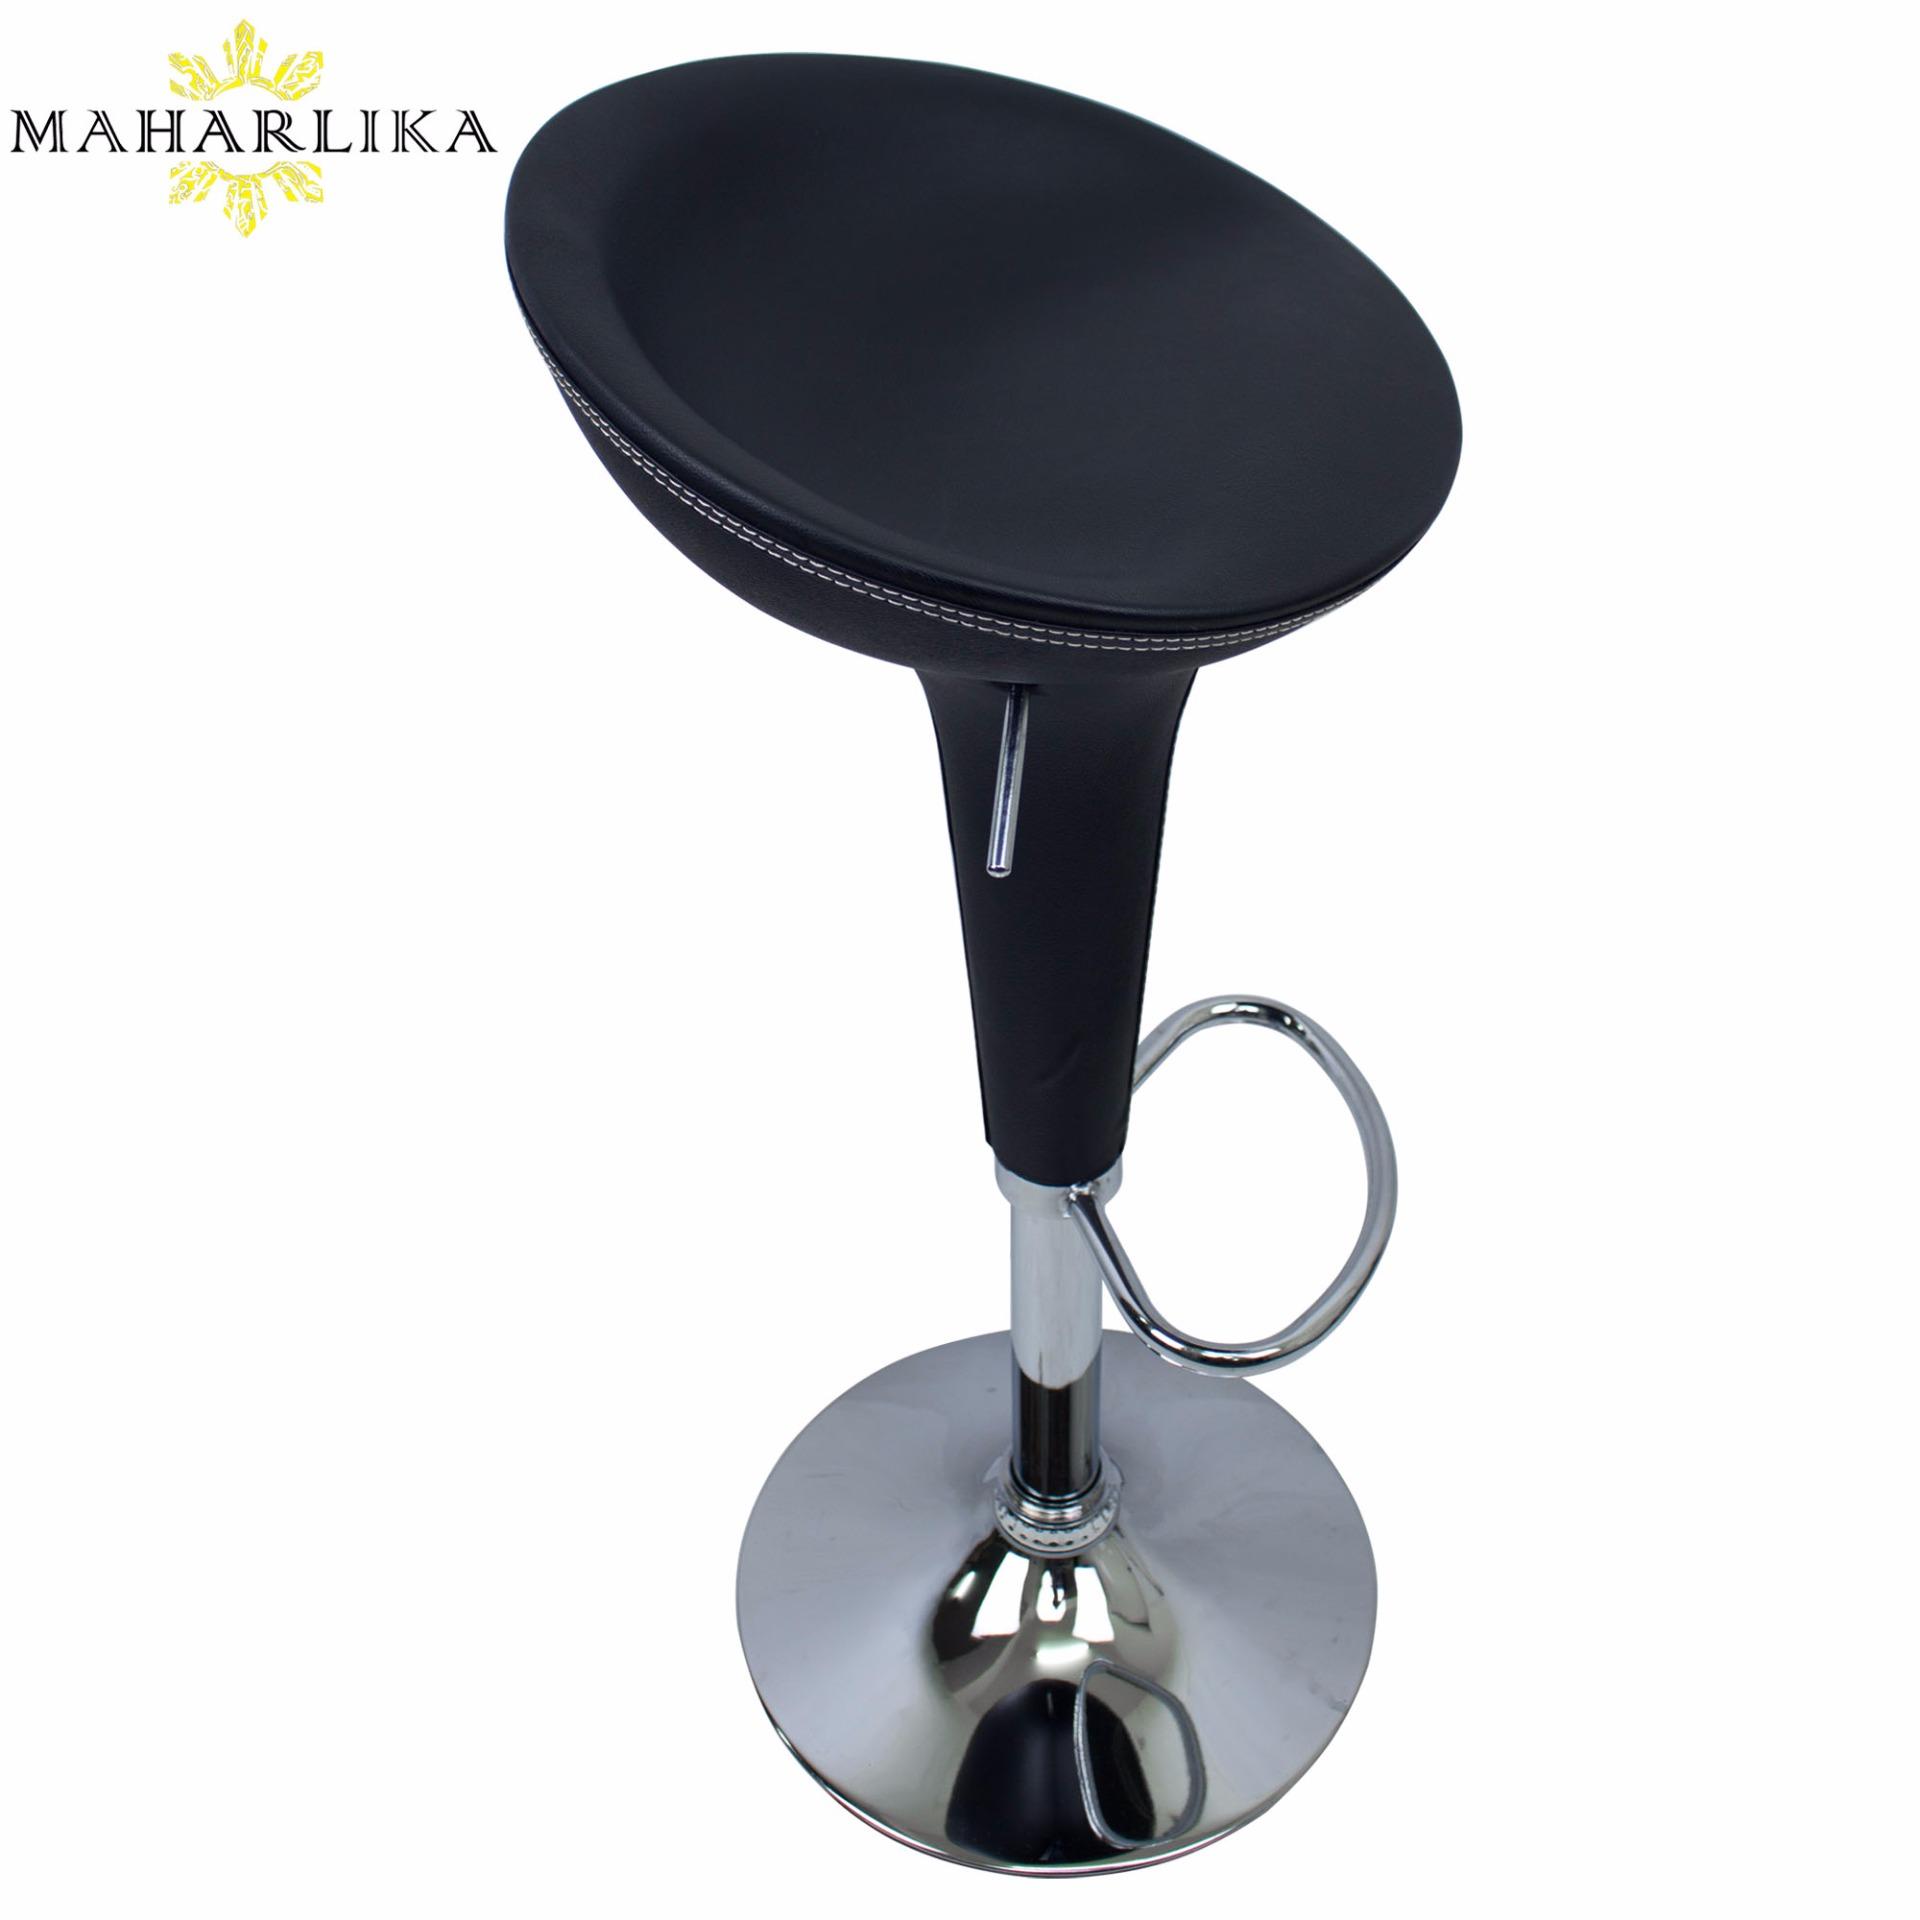 Bar Stool For Sale Bar Stool Chairs Prices Brands Review In